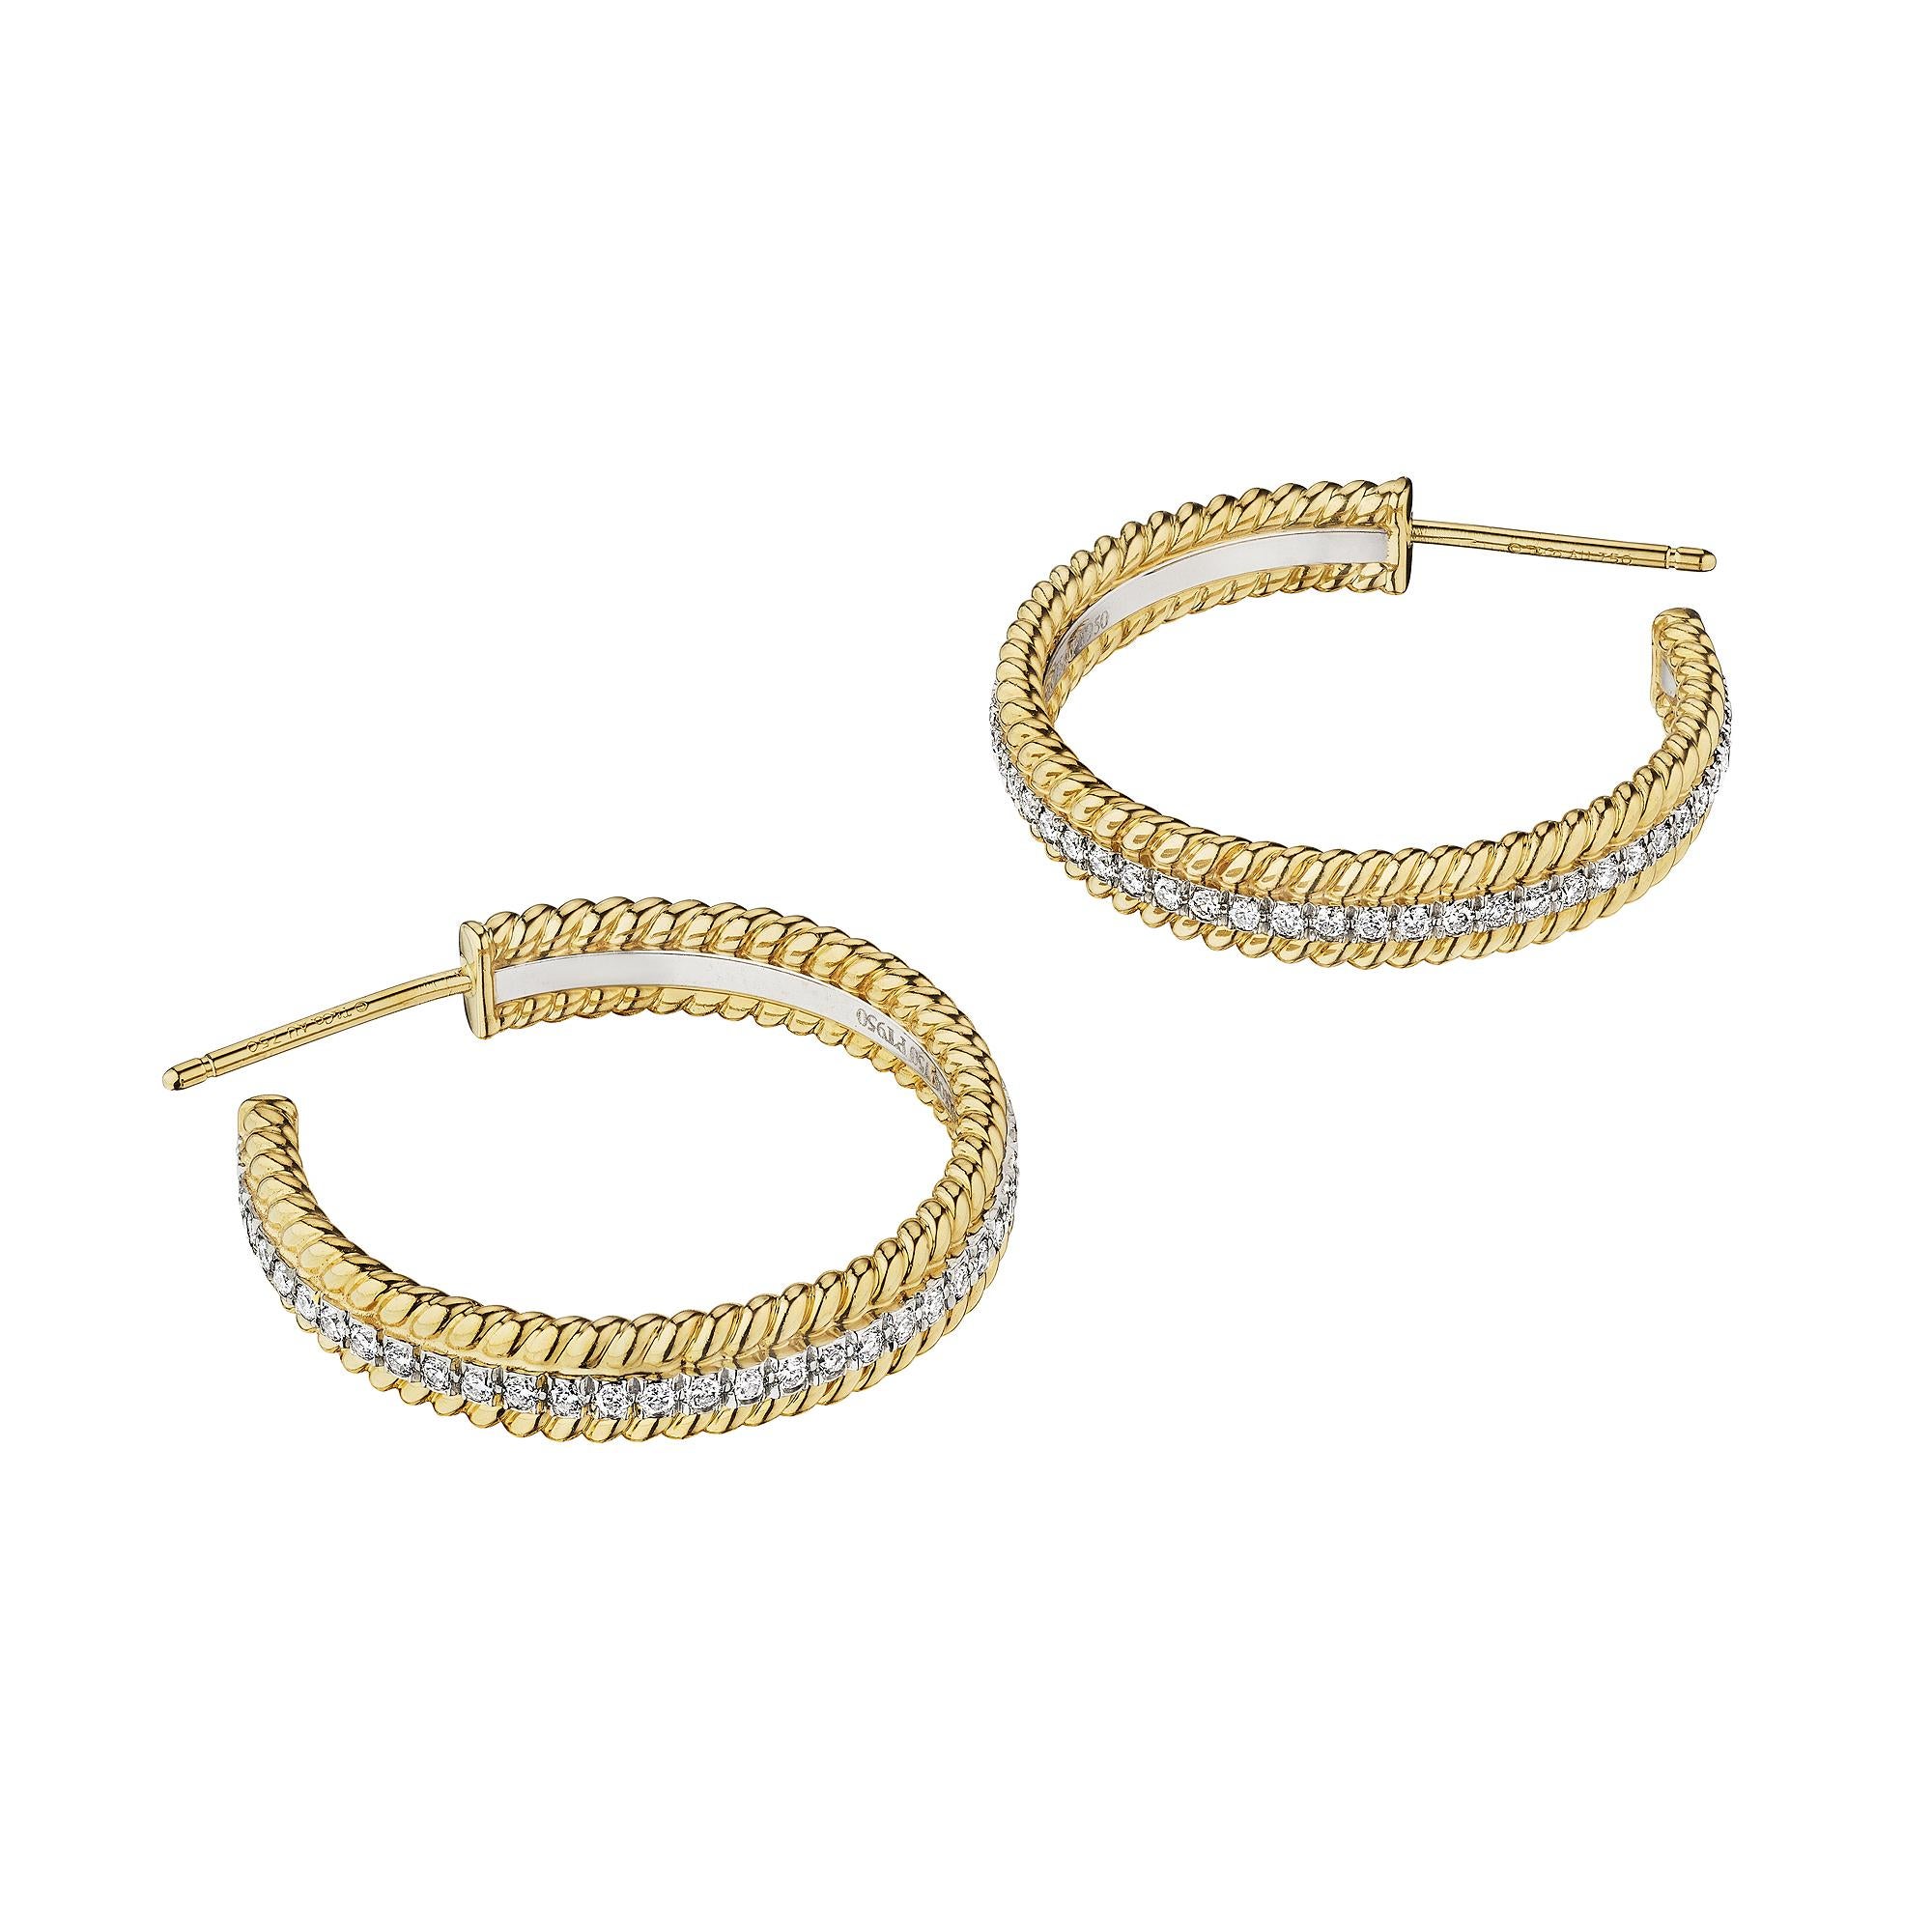 Circle yourself with these Jean Schlumberger Tiffany & Co. modernist diamond gold platinum hoop earrings.  With a row of round brilliant cut diamonds, surrounded by twisted 18 karat yellow gold ropes, these dazzling earrings are a wardrobe must